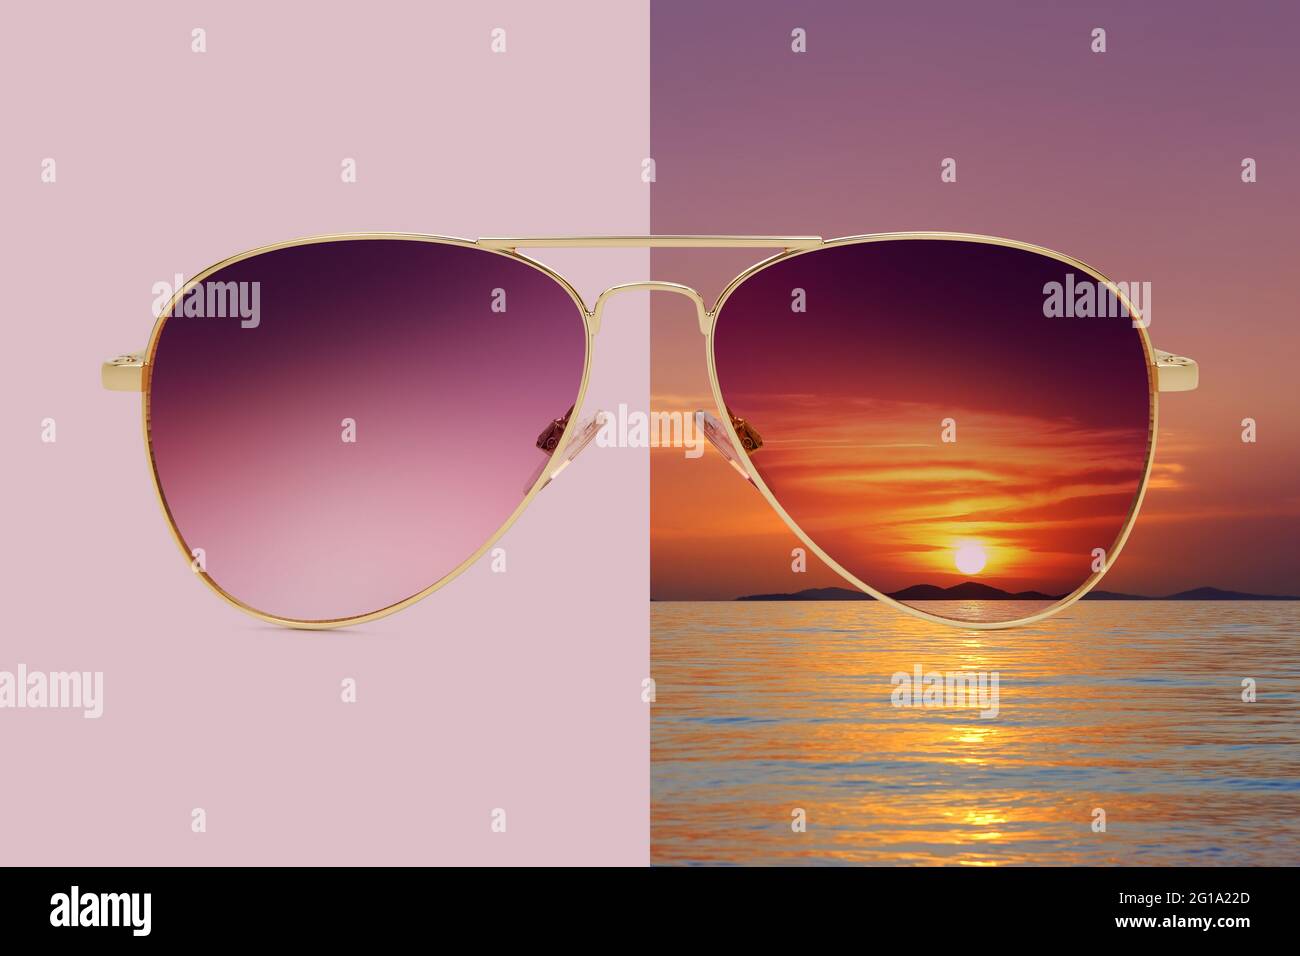 aviator sunglasses isolated on pink and summer sunset background with sea and red sky, concept of polarized protective lenses Stock Photo